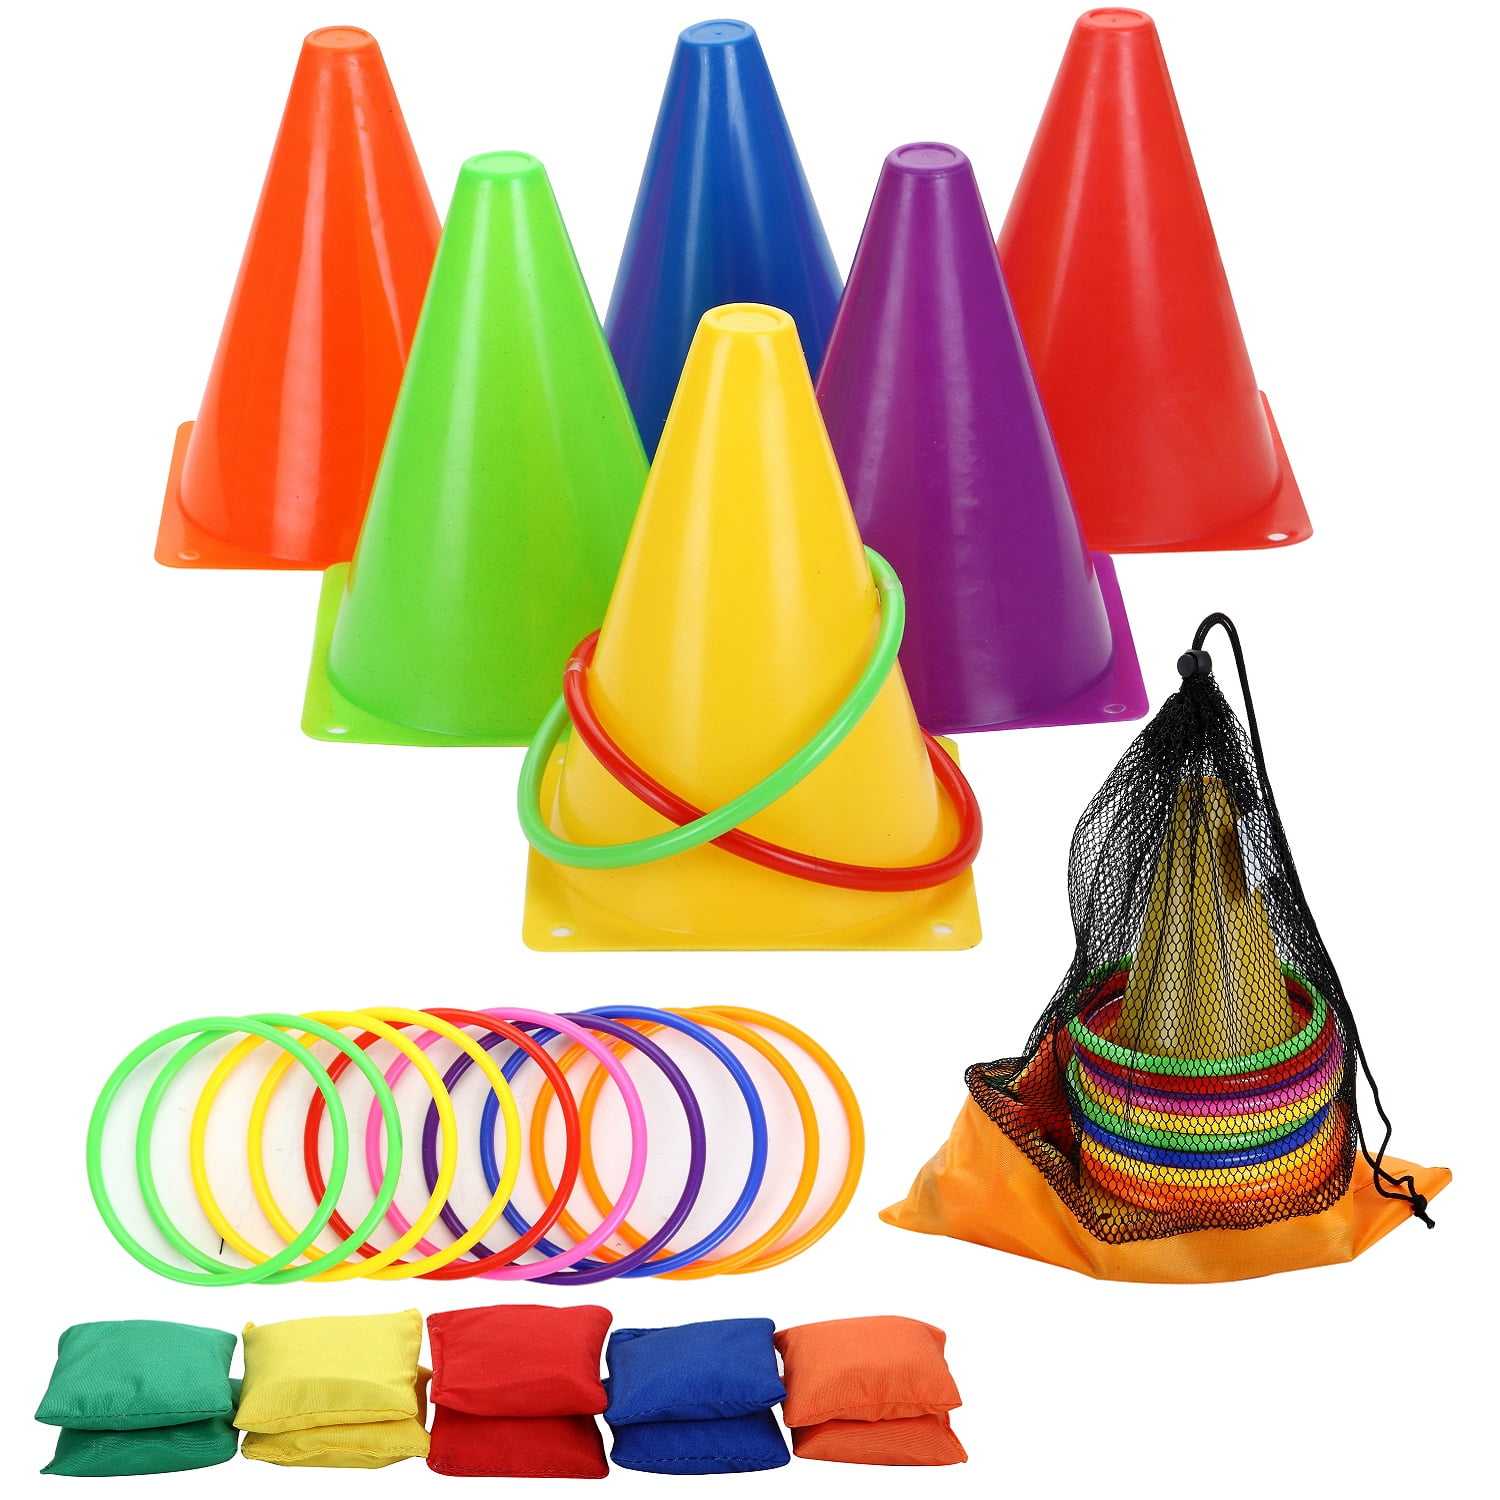 3 in 1 Carnival Outdoor Games Combo Set Cornhole Bean Bags Ring Toss Game Soft Plastic Cones Birthday Party Kids Games 26 Pcs 2292cb4d 3783 419c 8840 4a976c5f3806.9b5847ac1c5612b8dc14011aa2afbcf7